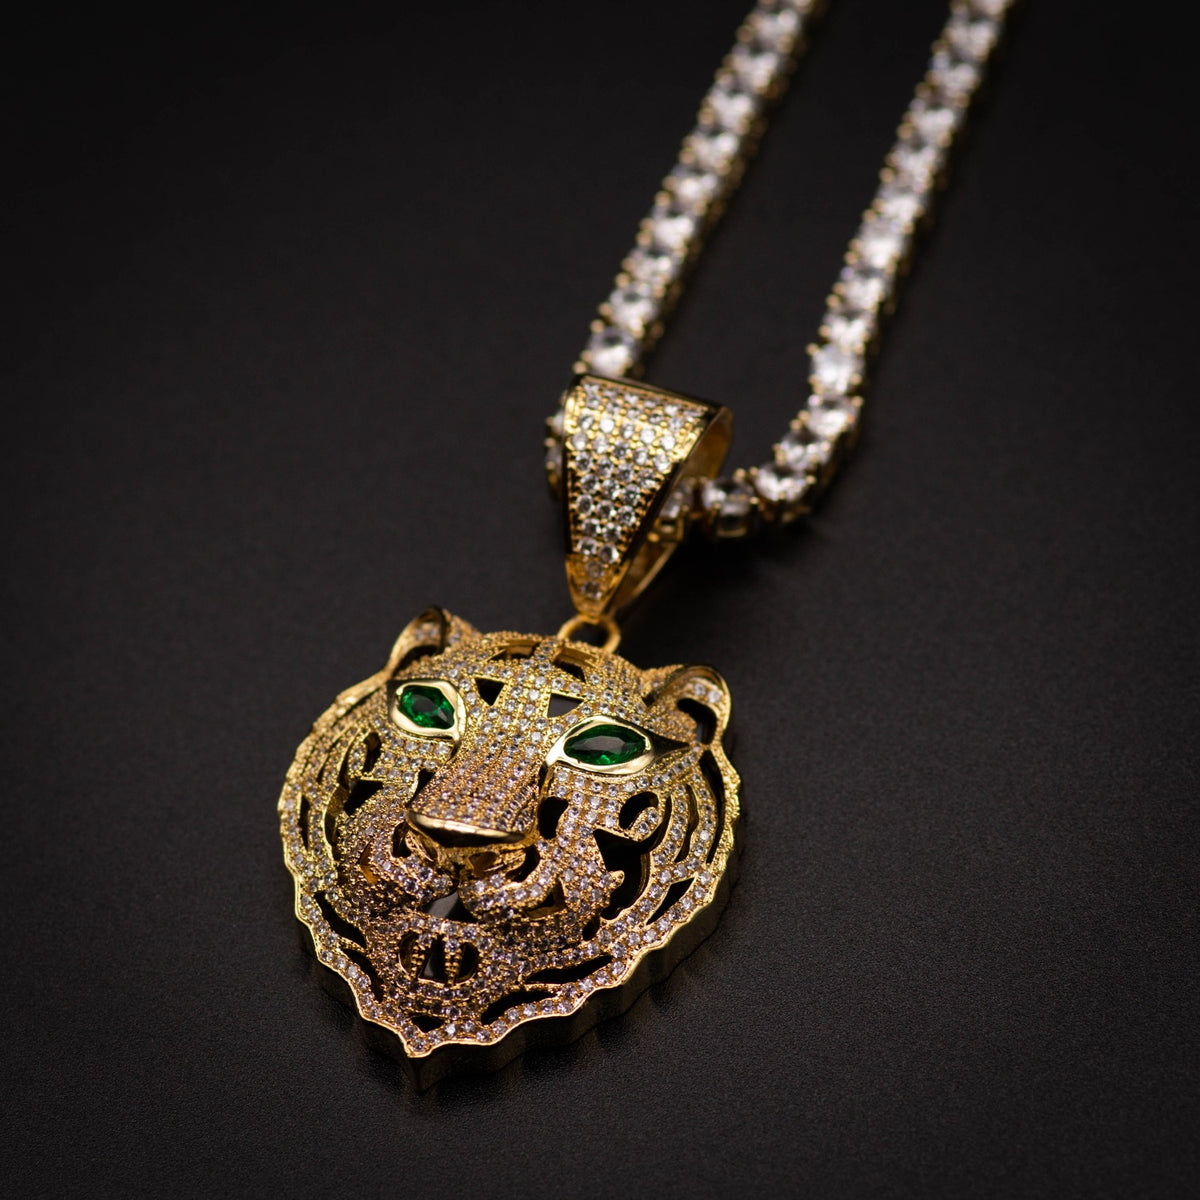 Emerald Tiger Necklace - The Jewelry Plug